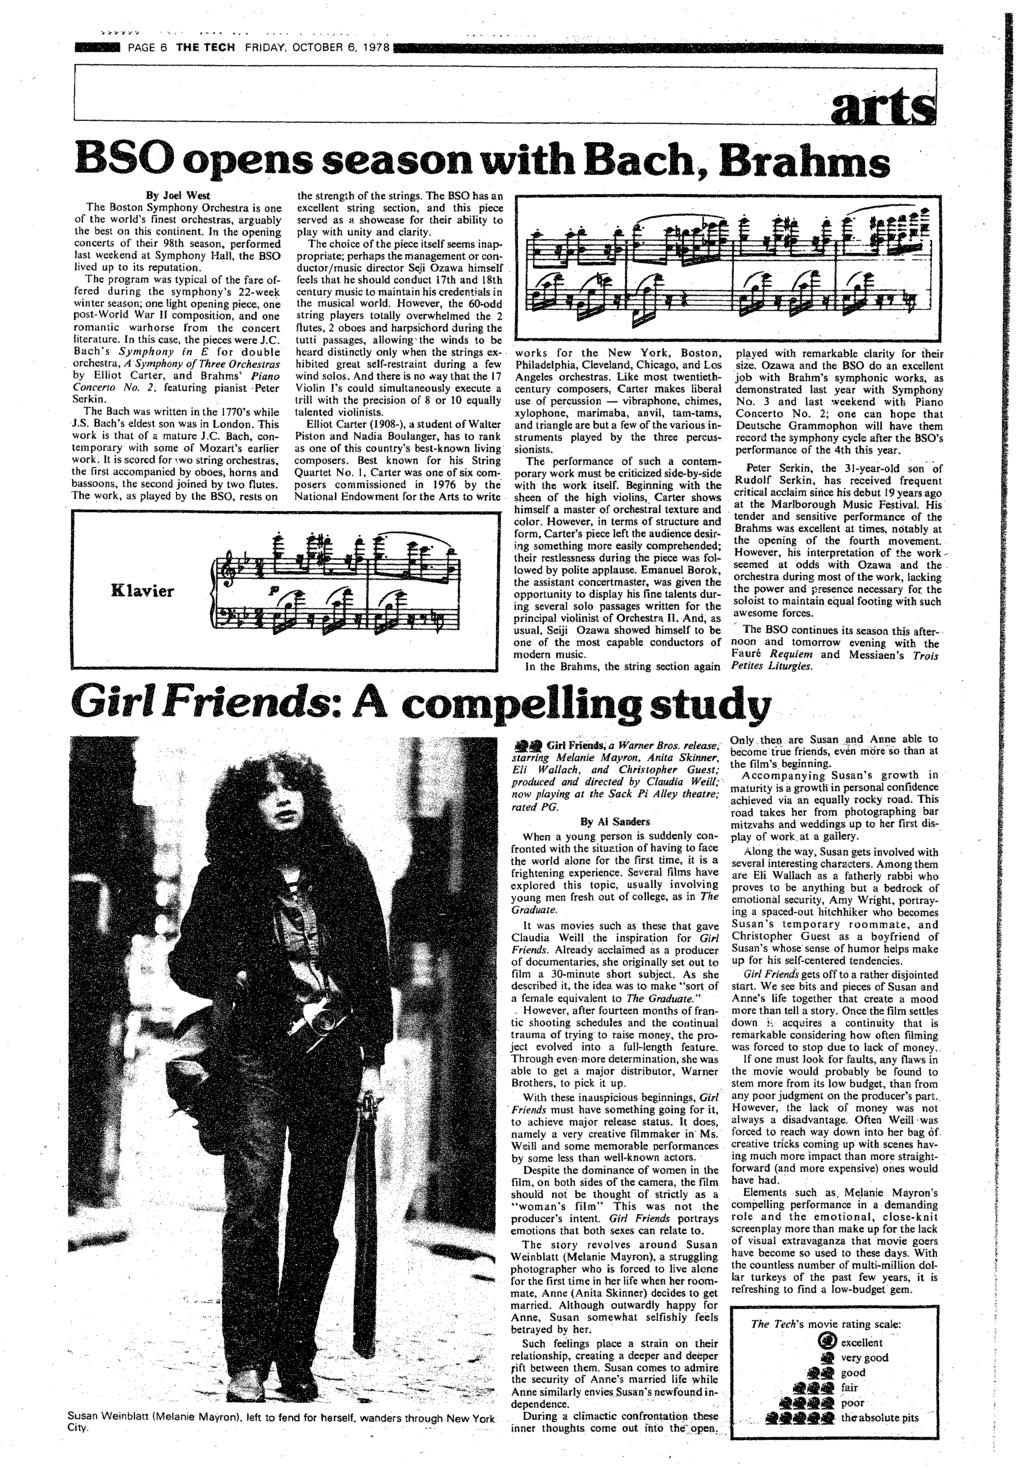 PAGE 6 TE TEC FRDAY, OCTOBERG, 19-78 PAGE 6 THE TECH FRDAY, OCTOBER 6, 1978 rmrsas lwplpllaarala4;raaa 0 f s~~~~~~~~~~~~d By Joel West The Boston Symphony Orchestra s one of the world's fnest